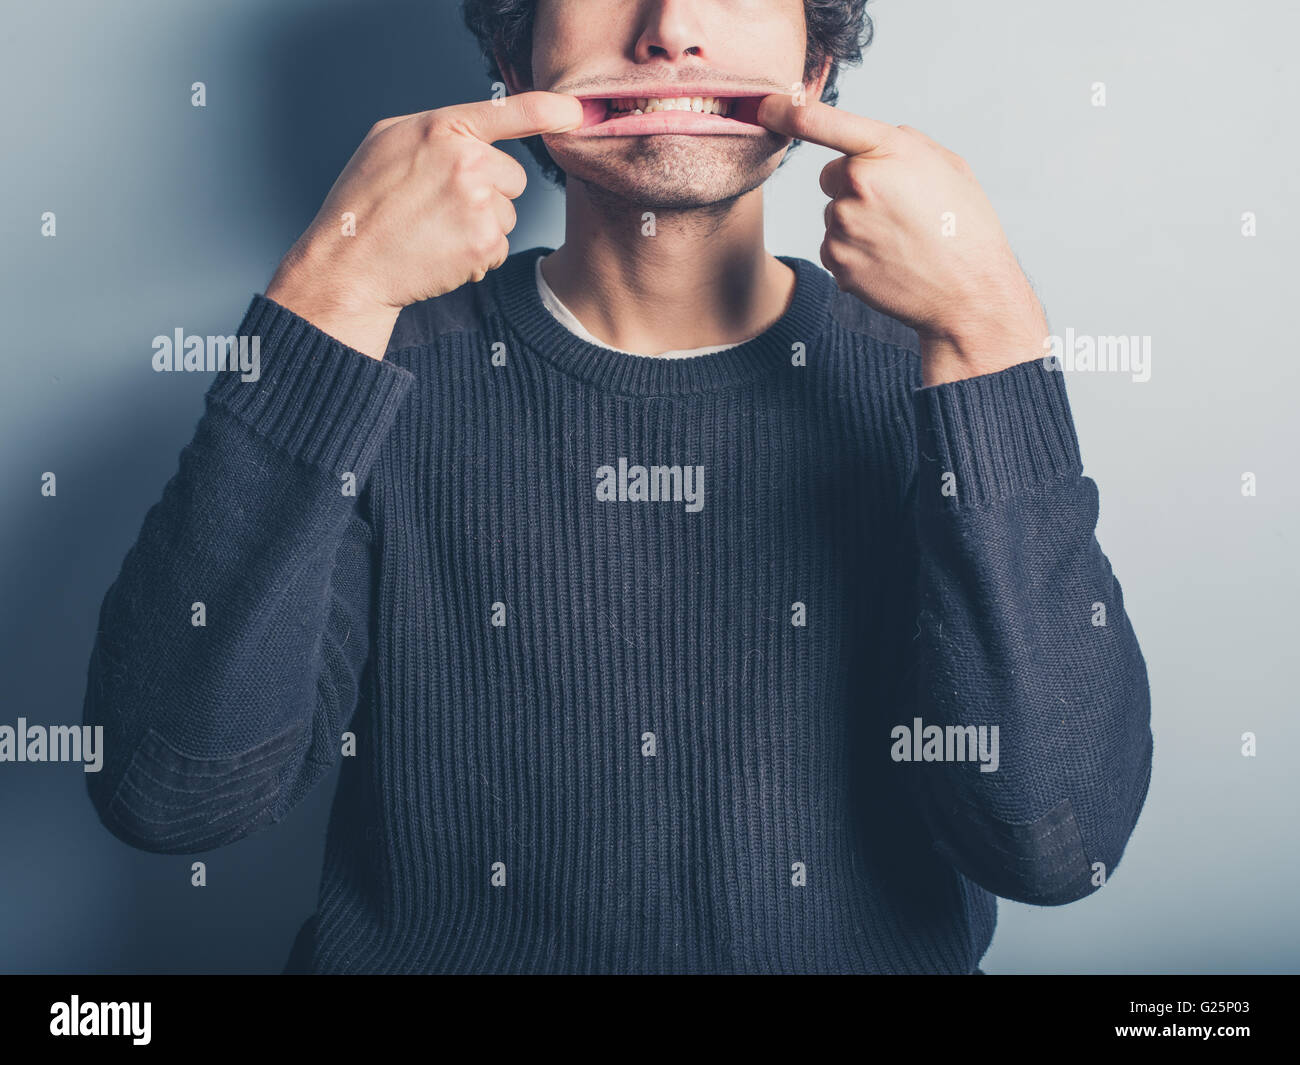 A young man wearing a black sweater is pulling silly faces Stock Photo